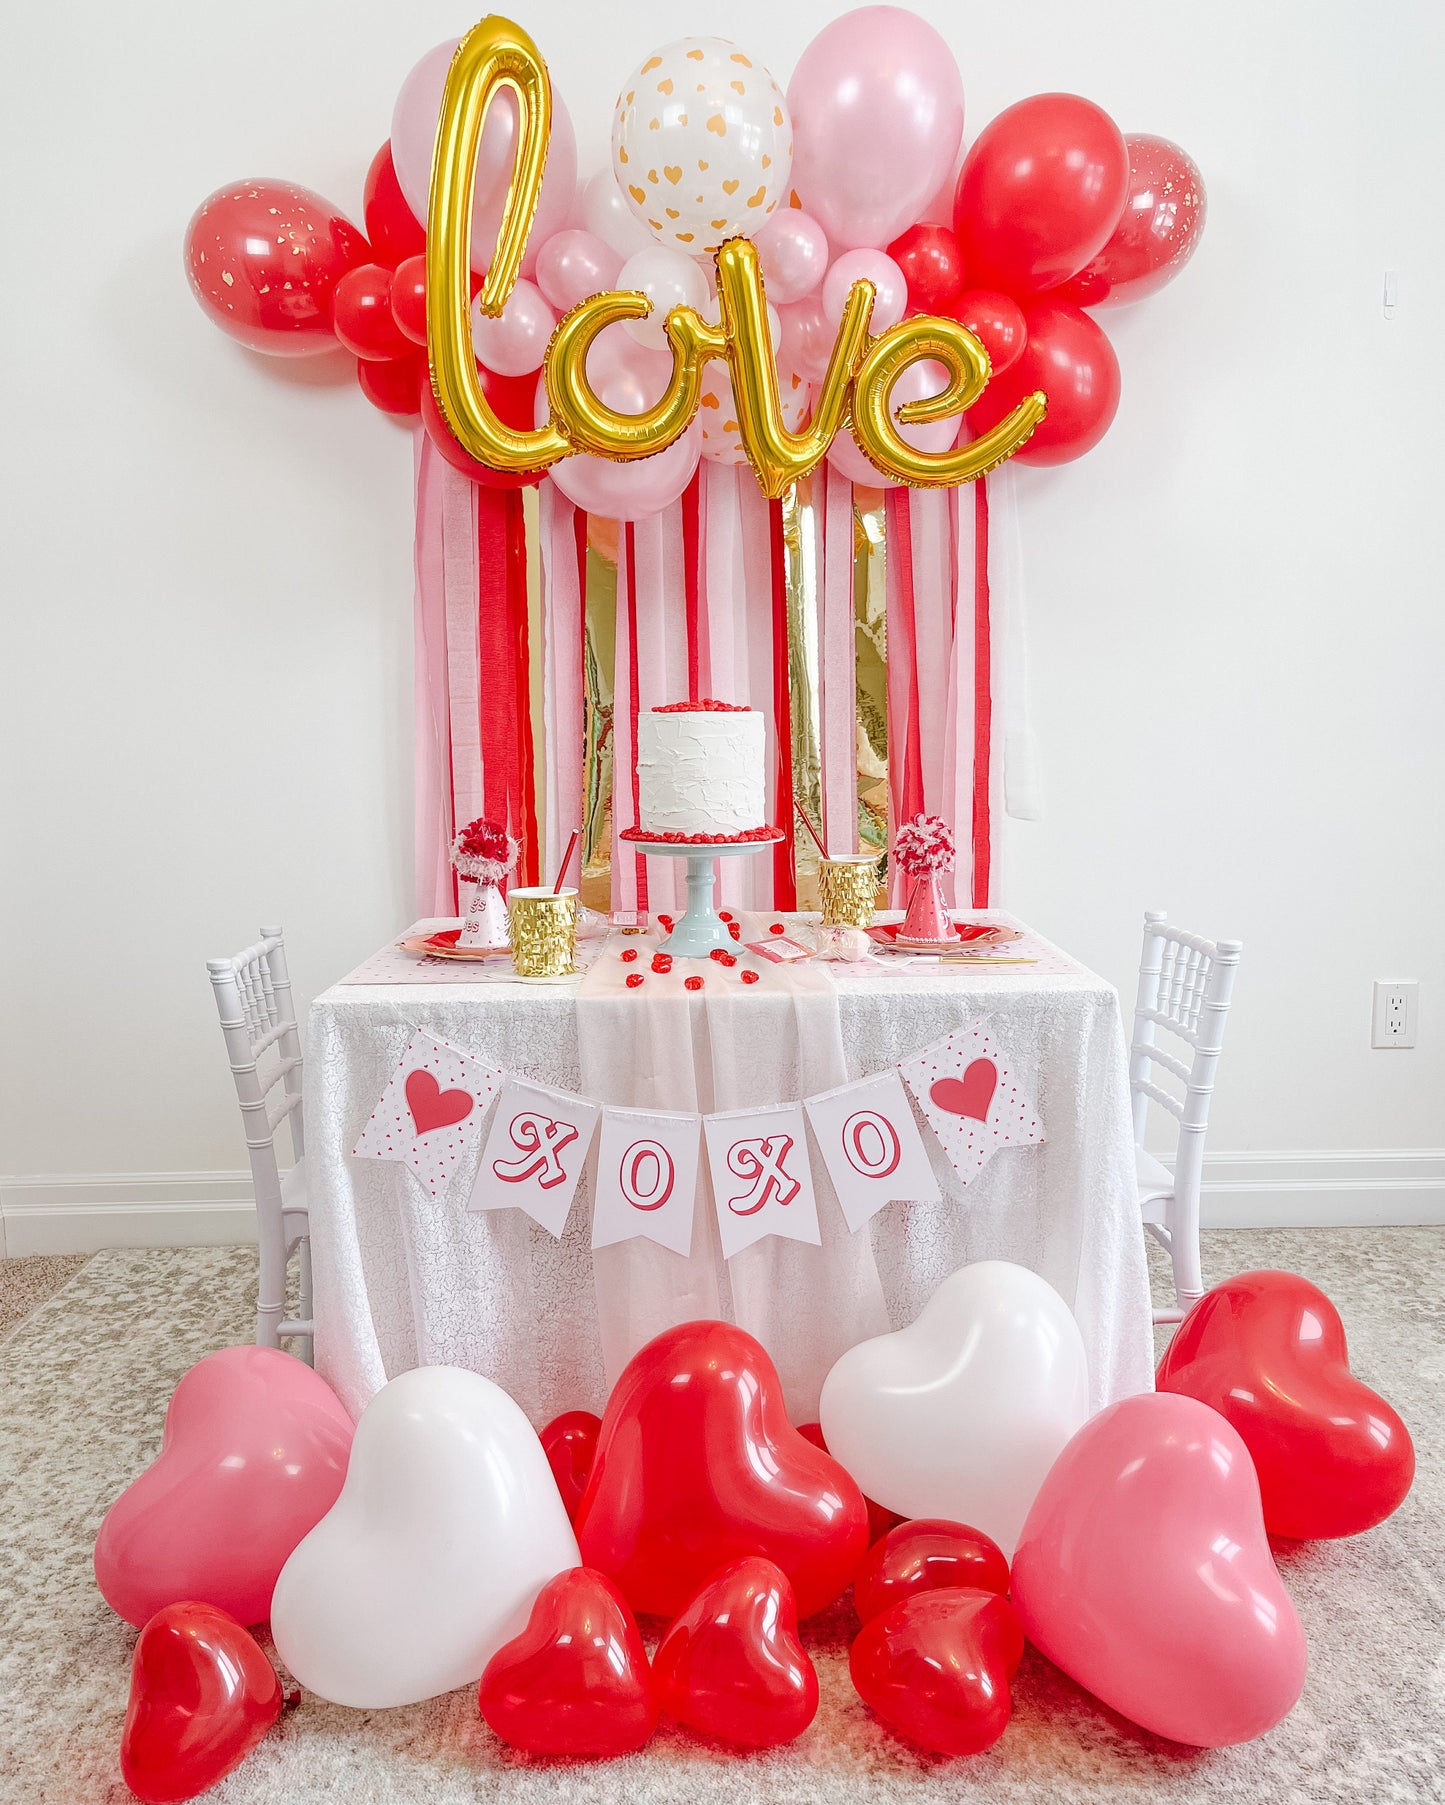 11" Heart Shaped Balloons 6 Pack || Red, Pink, and White Latex Balloons || Valentine's Day Balloons || Valentine's Day Decor || VD02